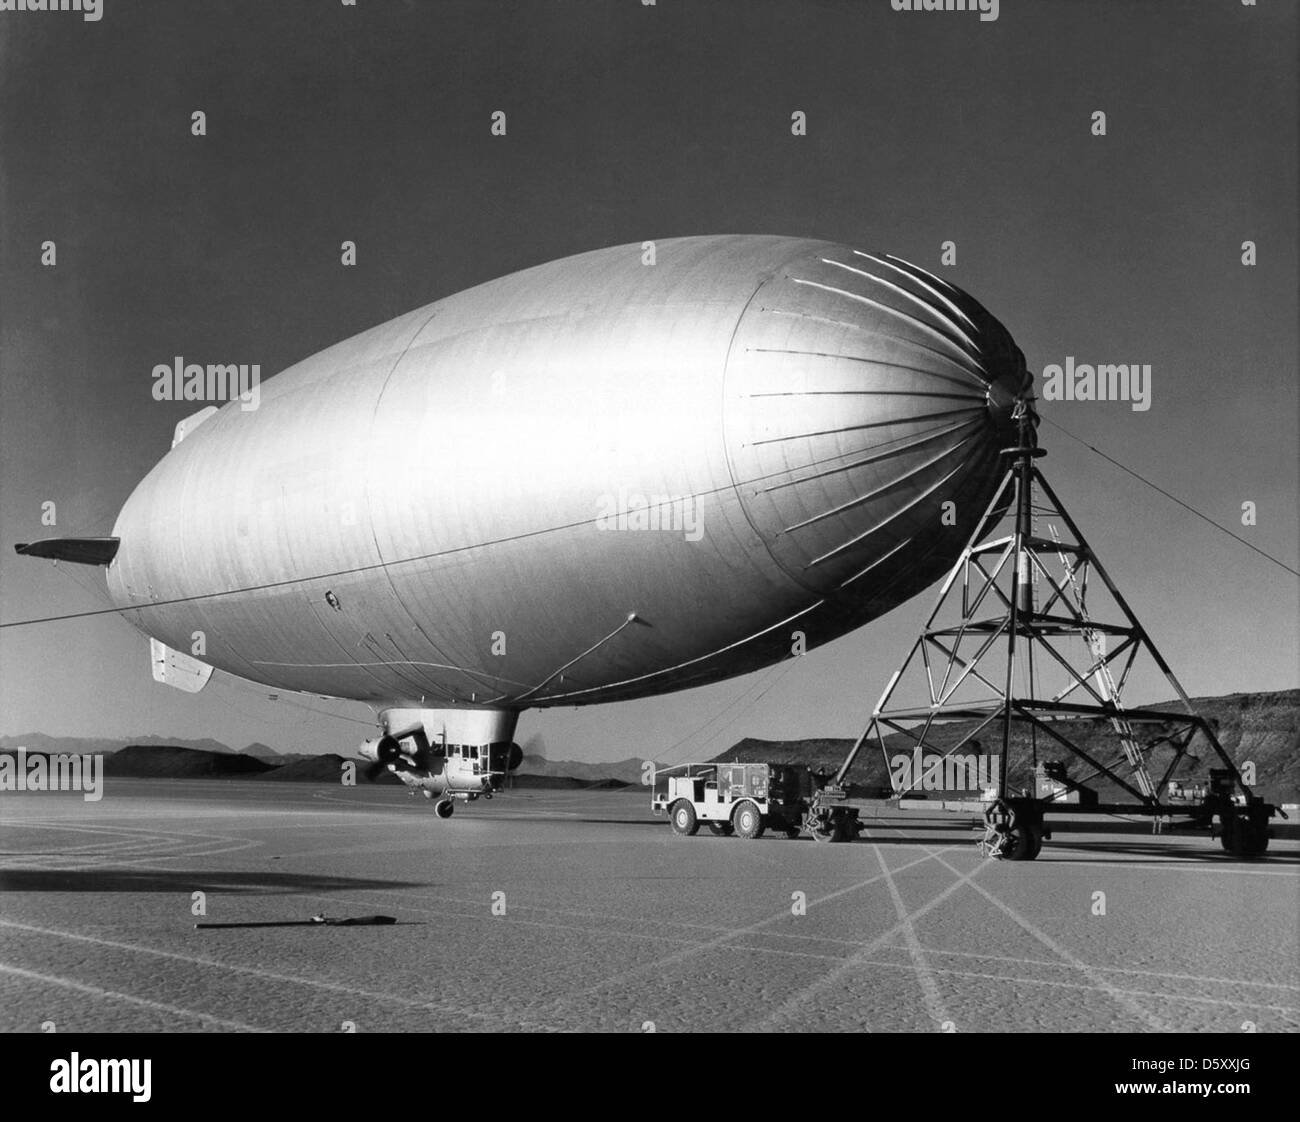 July 24, 1957 - Navy ZSC-1 Blimp ties up at mooring platform in Yucca Flat, having just arrived from Lakehurst NAS to prepare for Atomic blast tests. Stock Photo